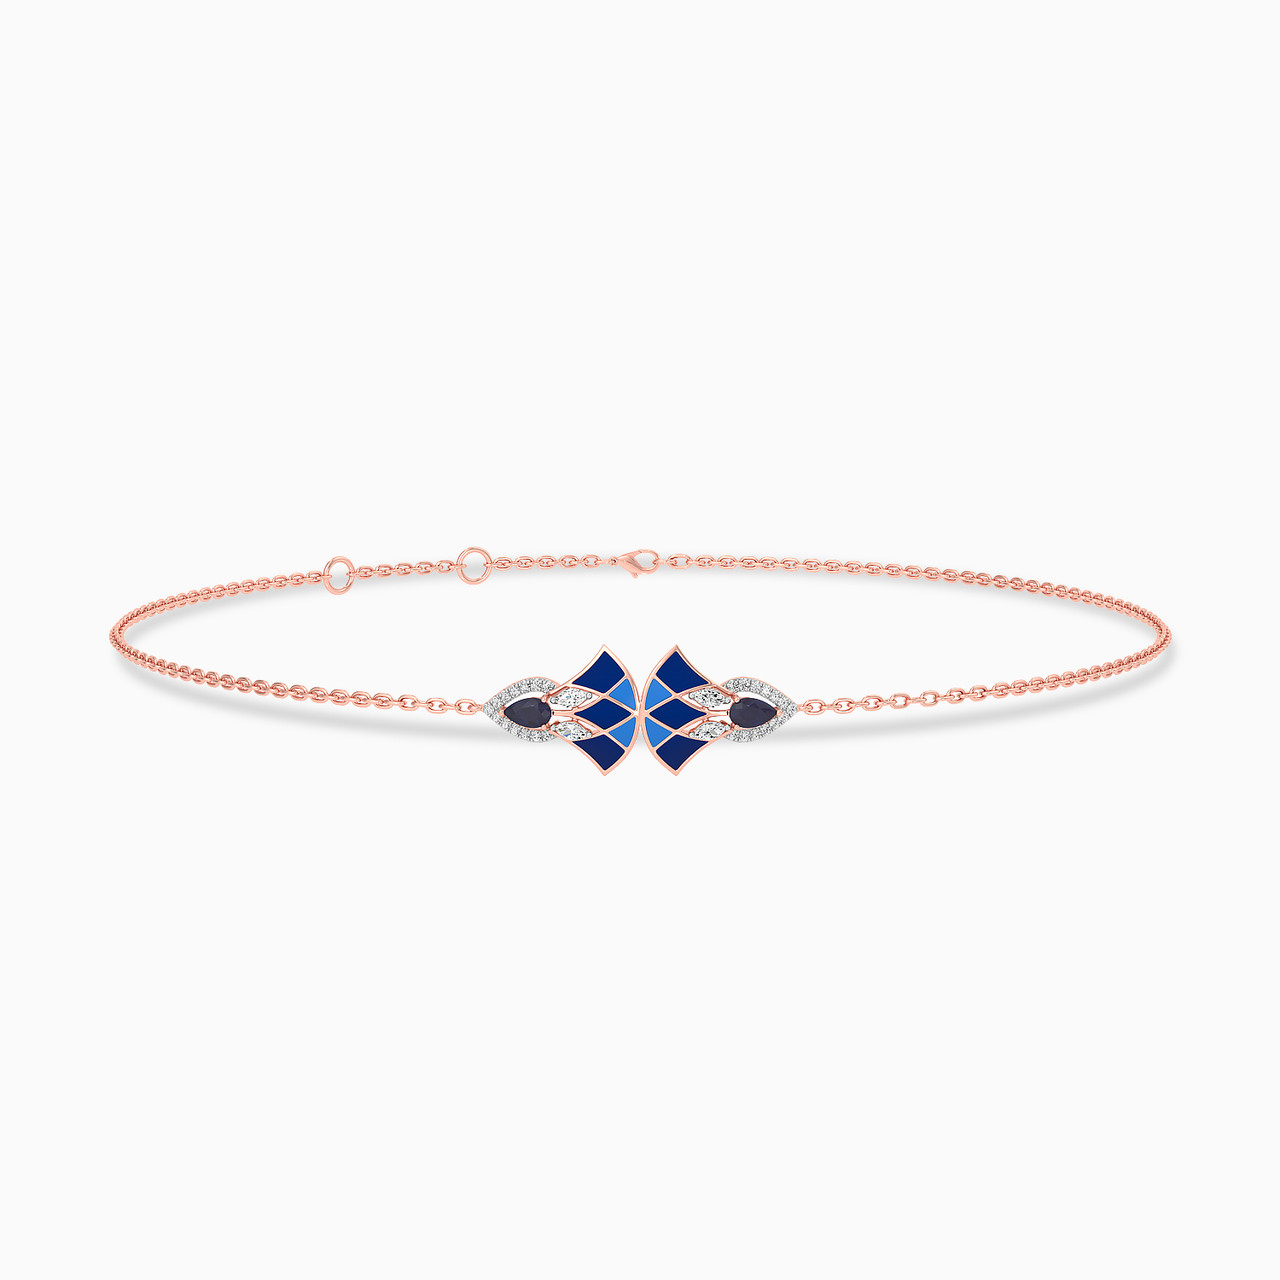 Multi-shaped Diamond & Enamel Coated with Colored Stones Chain Bracelet in 18K Gold